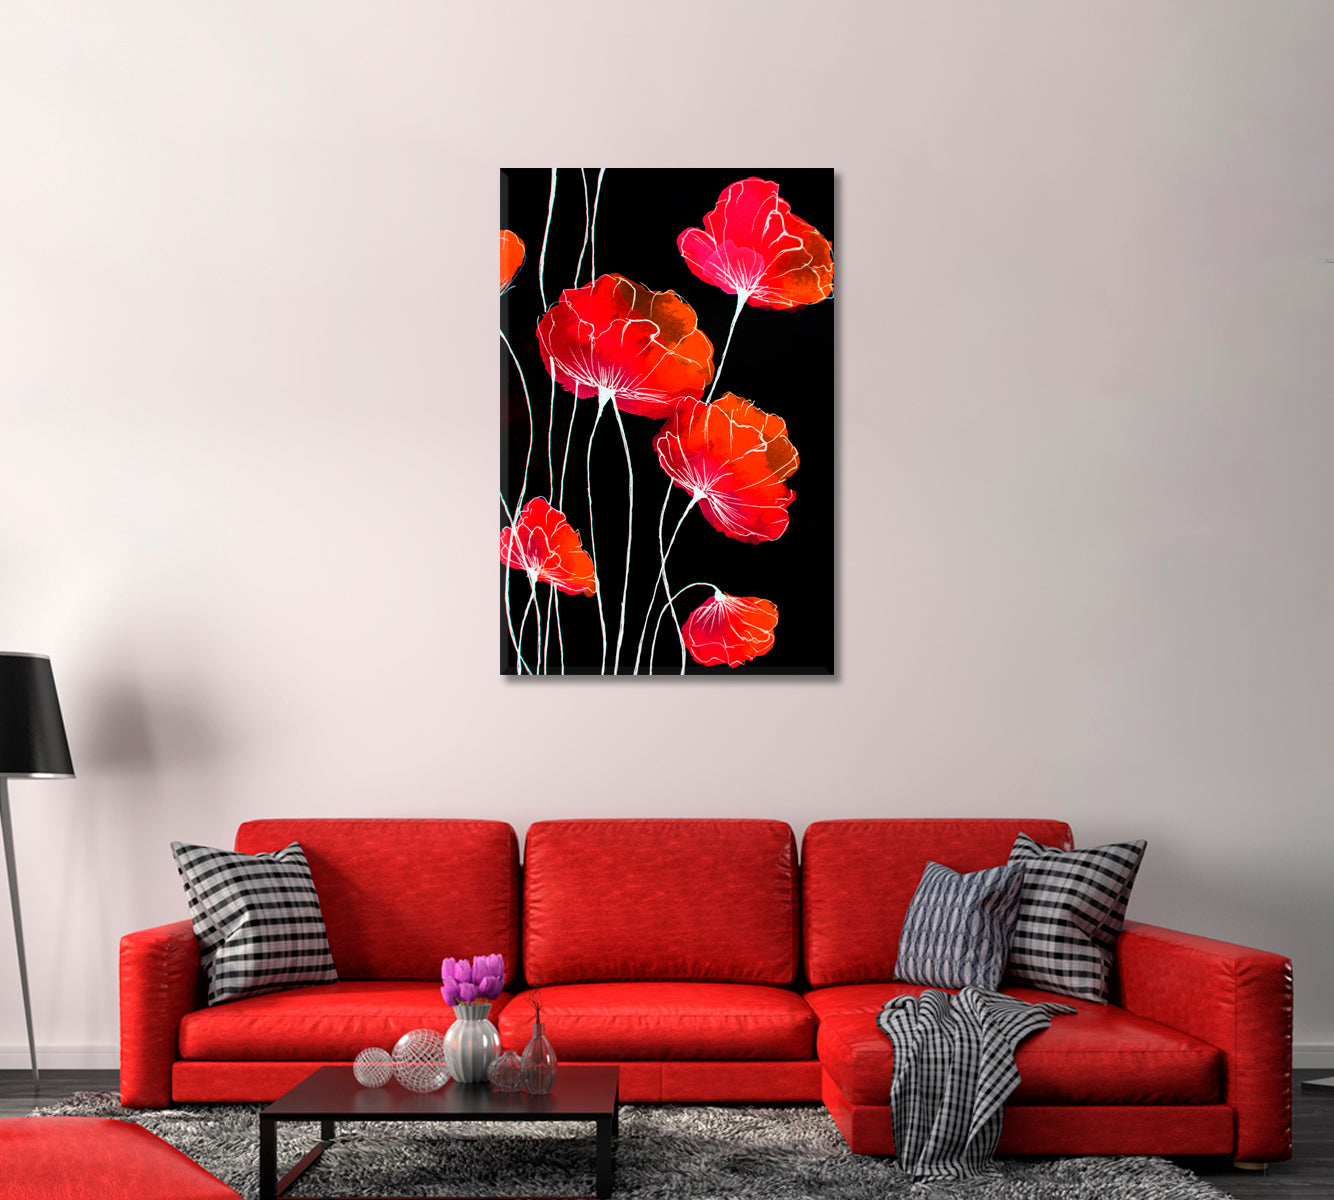 Abstract Flowers Floral Still Life Canvas Print-Canvas Print-CetArt-1 panel-16x24 inches-CetArt